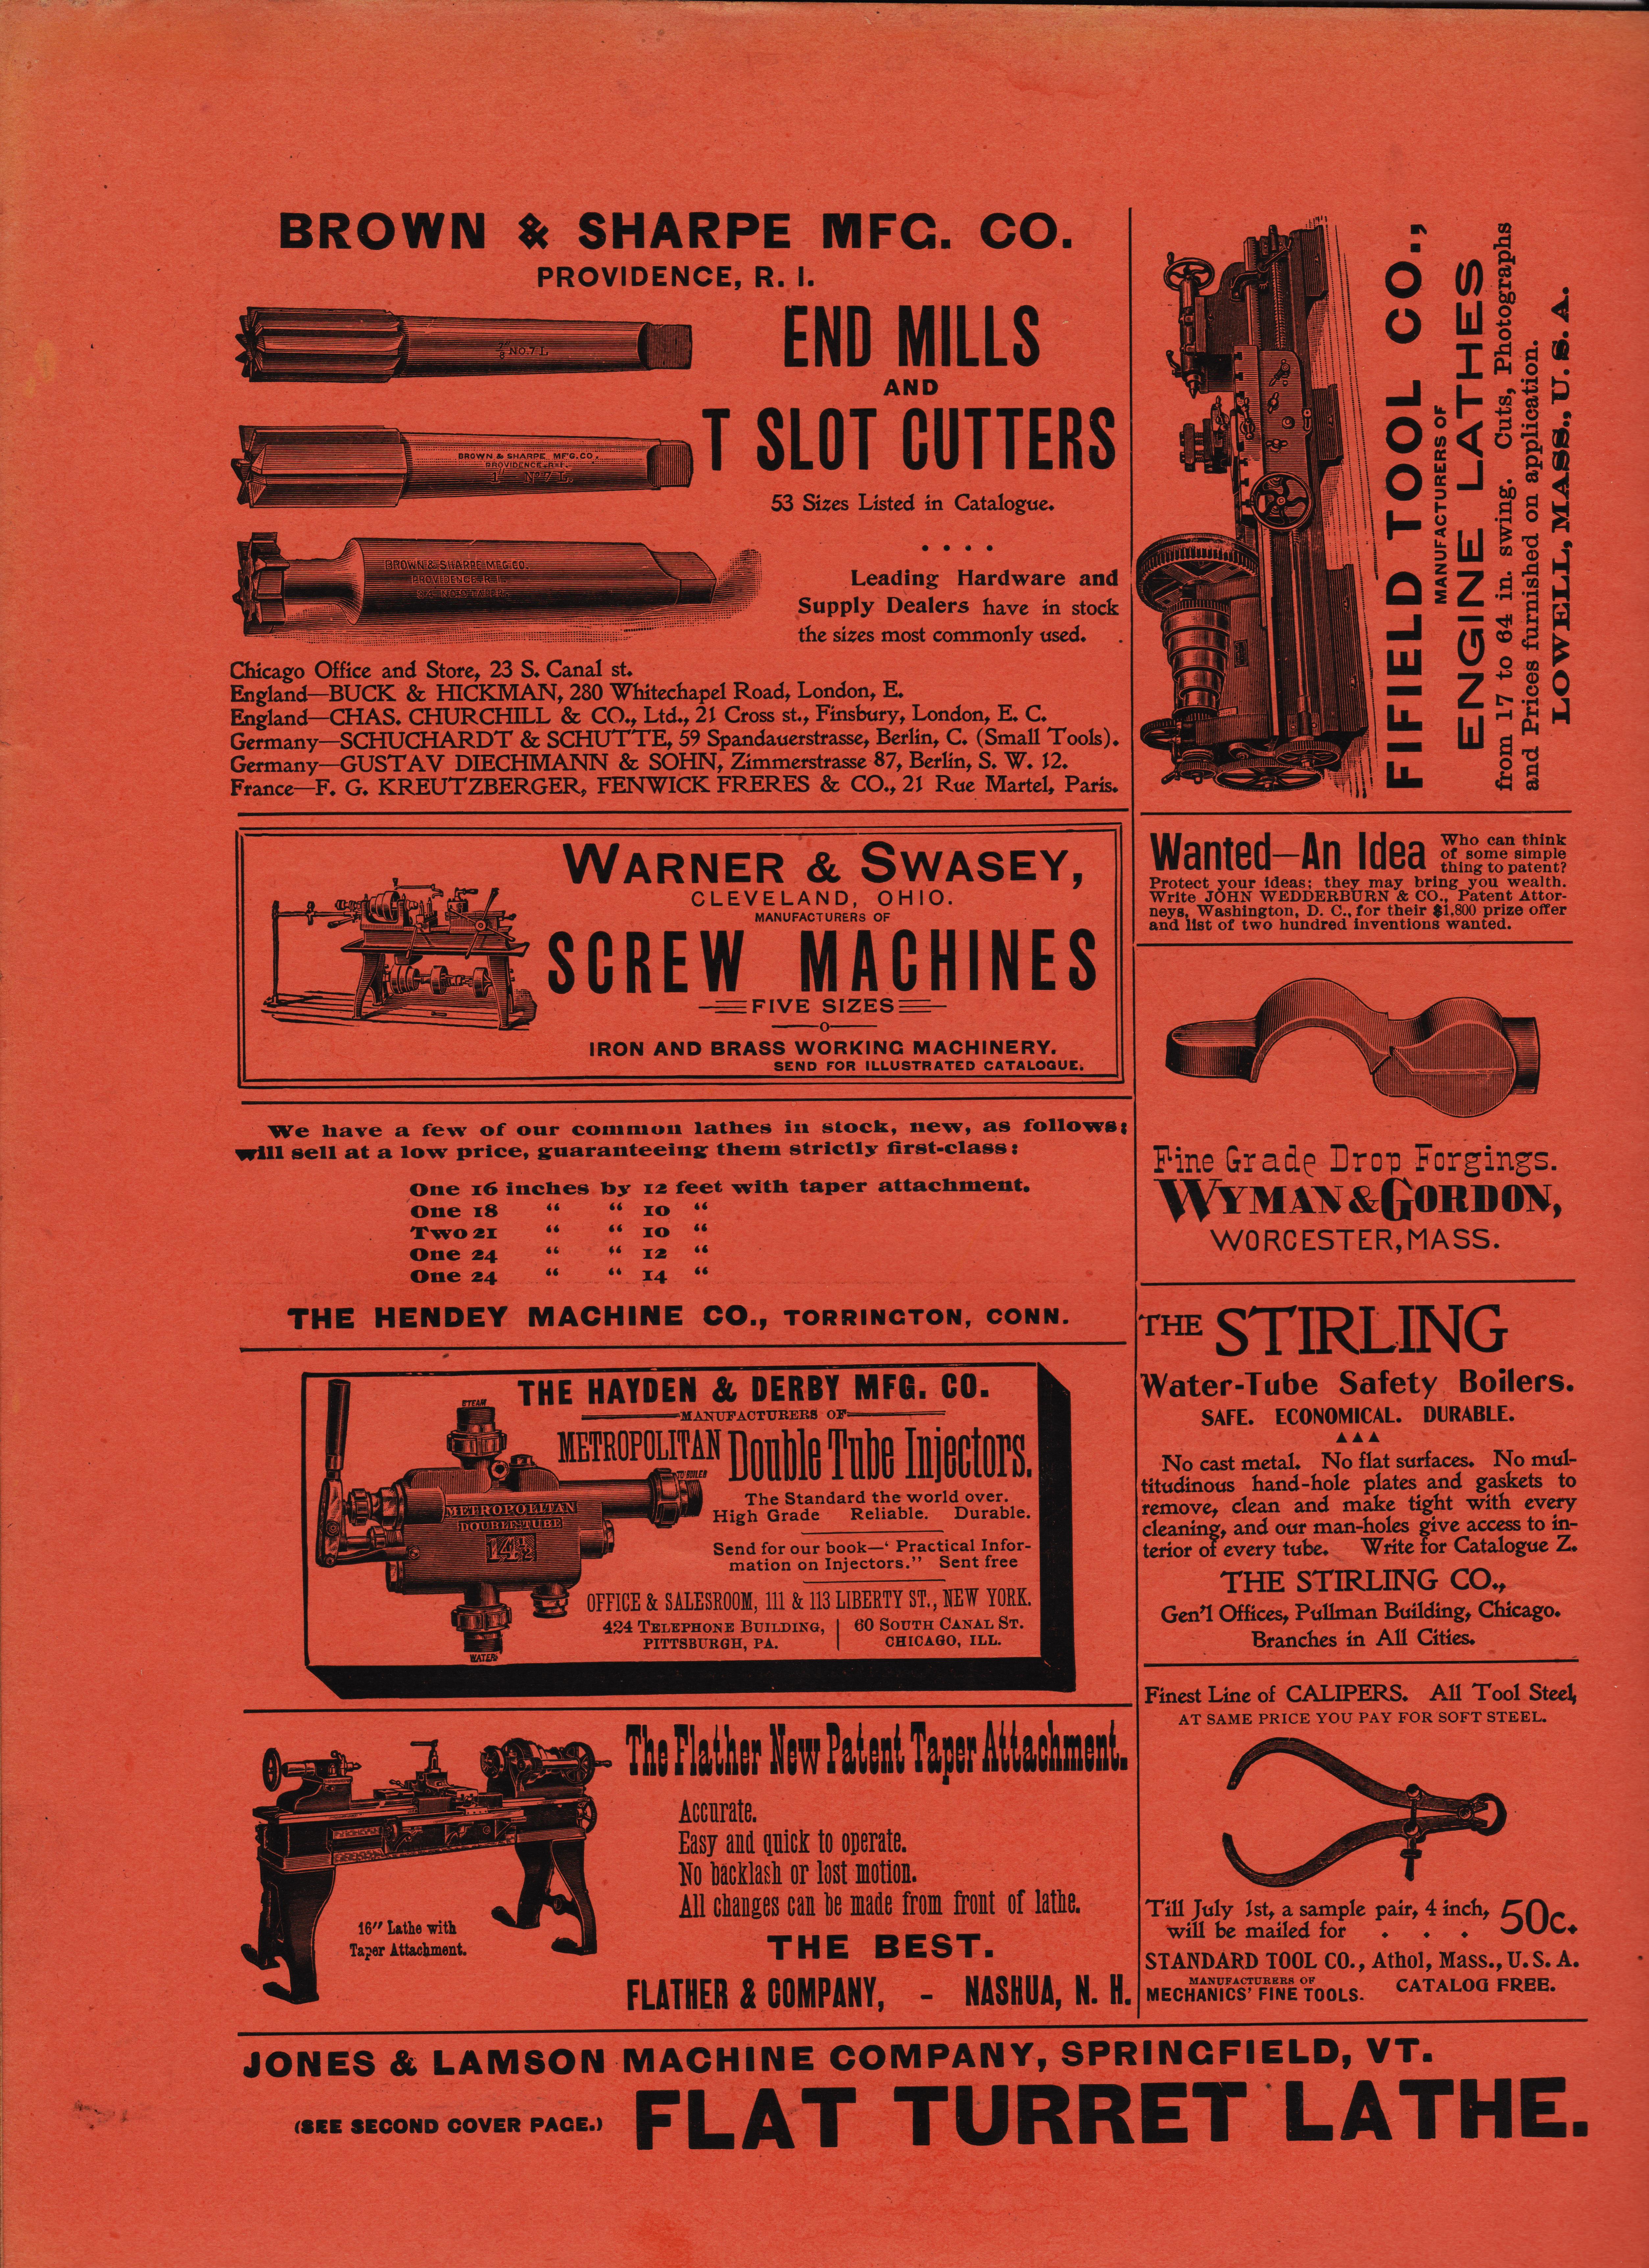 https://antiquemachinery.com/images-1896/American-Machinist-Feb-12-1887-May-1-pg-39-Davis-and-Egan-Machine-tool-co-Bicylle-Milling-Machinery-Milling.jpeg